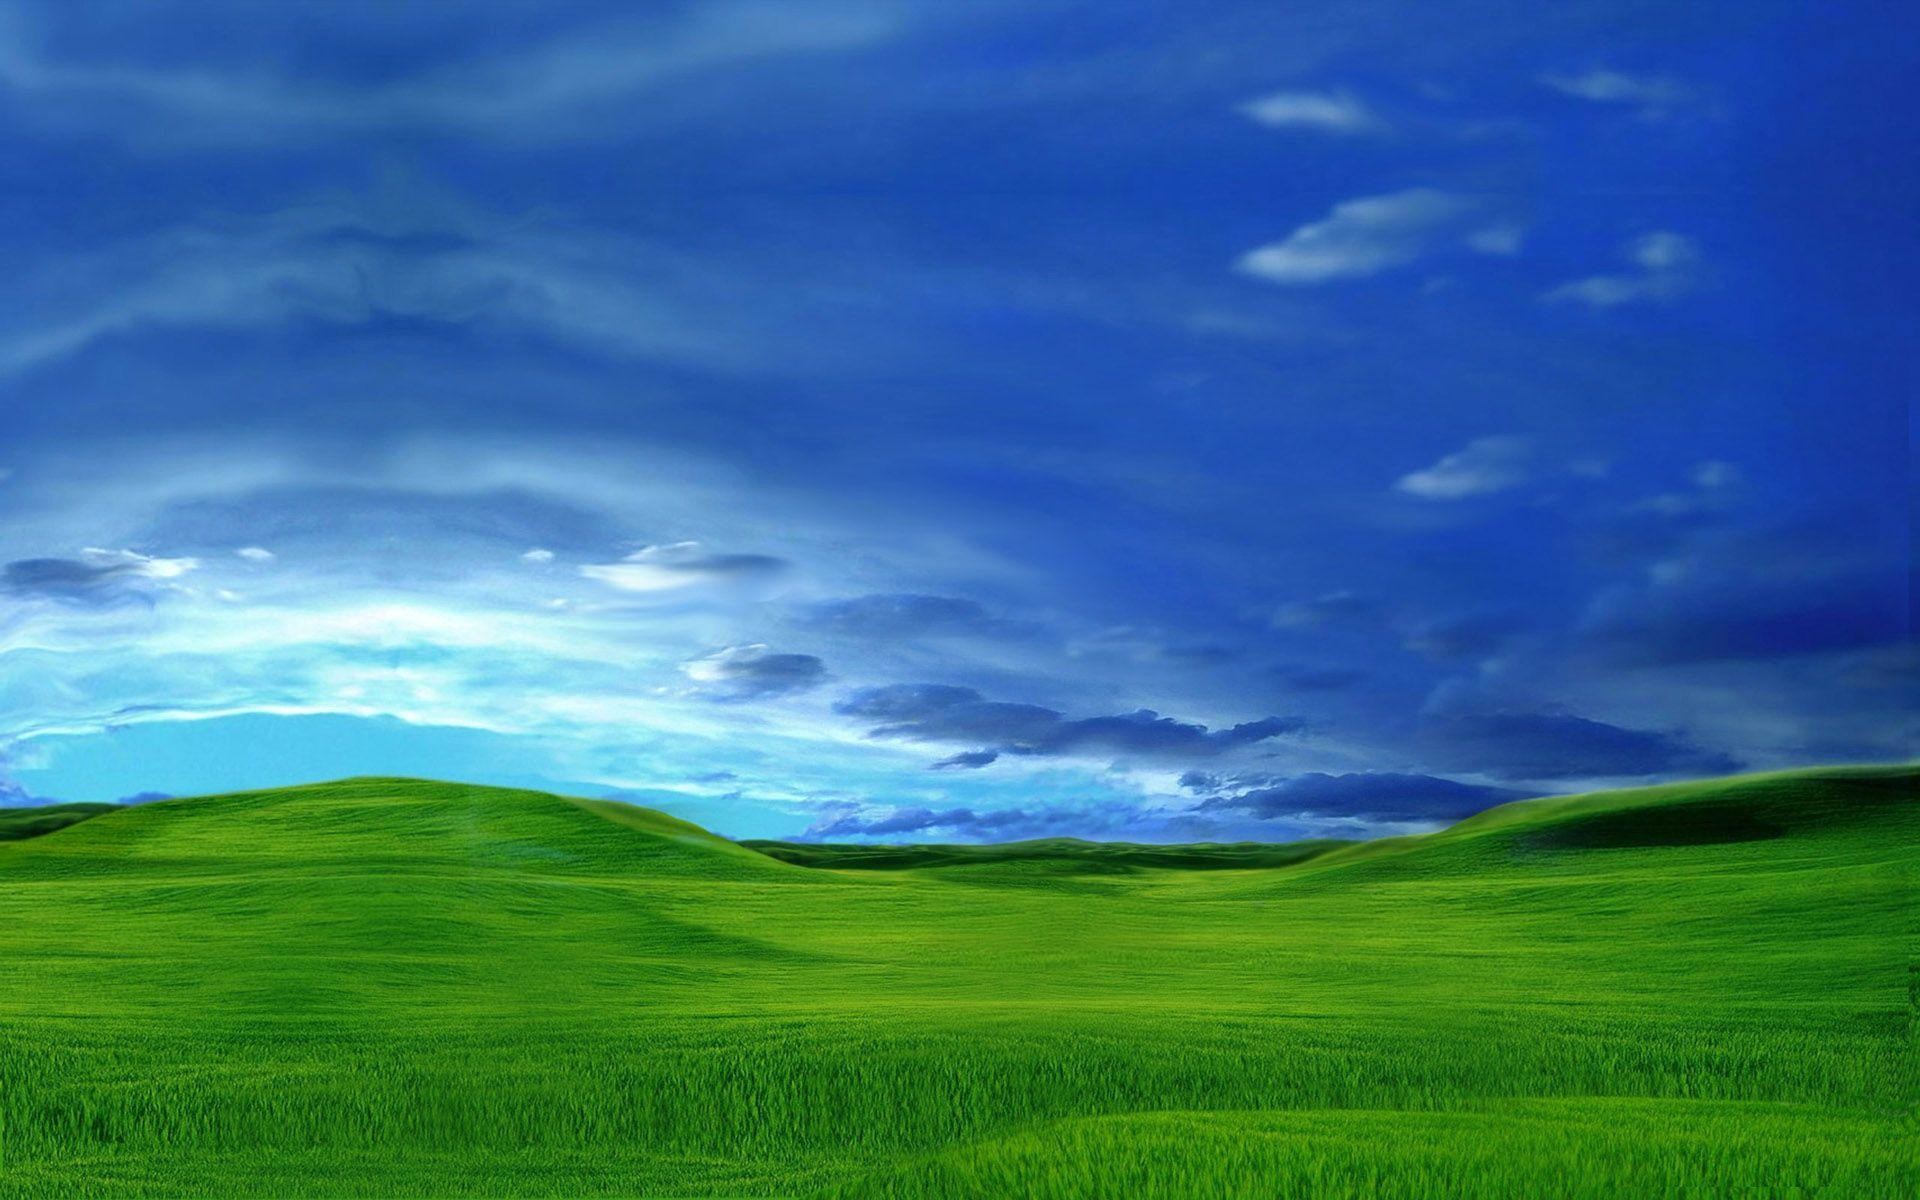 themes for windows xp